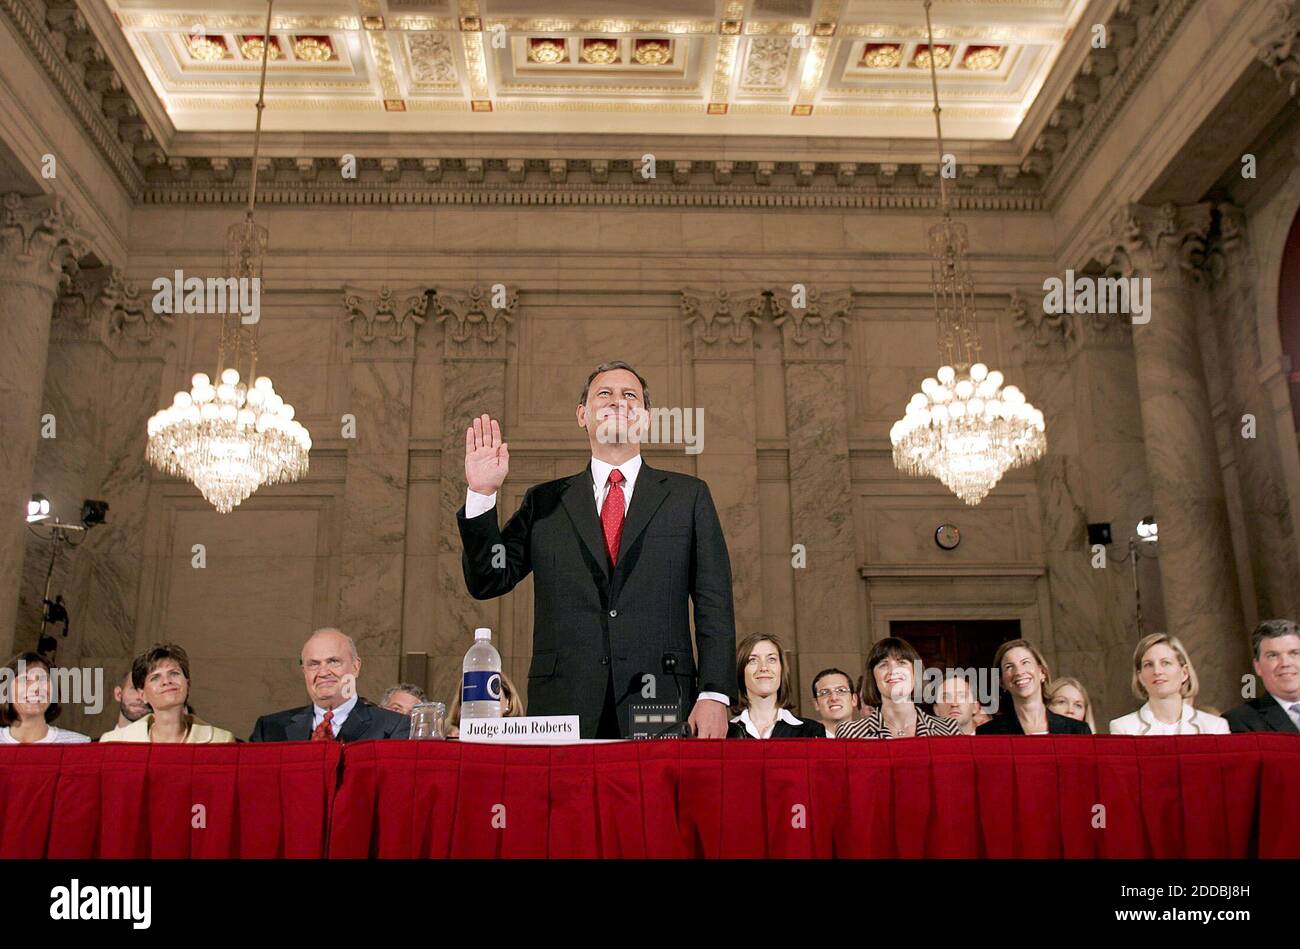 NO FILM, NO VIDEO, NO TV, NO DOCUMENTARY - John Roberts, nominee for Supreme Court Chief Justice of the United States, is sworn in before the Senate Judiciary Committee on Capitol Hill in Washington, DC, USA, on September 12, 2005. The Senate began week-long confirmation hearings on the nomination of star jurist Roberts to be the next US Supreme Court chief justice, Pesident George W. Bush's first shot at reshaping the high court to reflect his conservative views, following the death of William Rehnquist 03 September. Photo by Chuck Kennedy/KRT/ABACAPRESS.COM Stock Photo